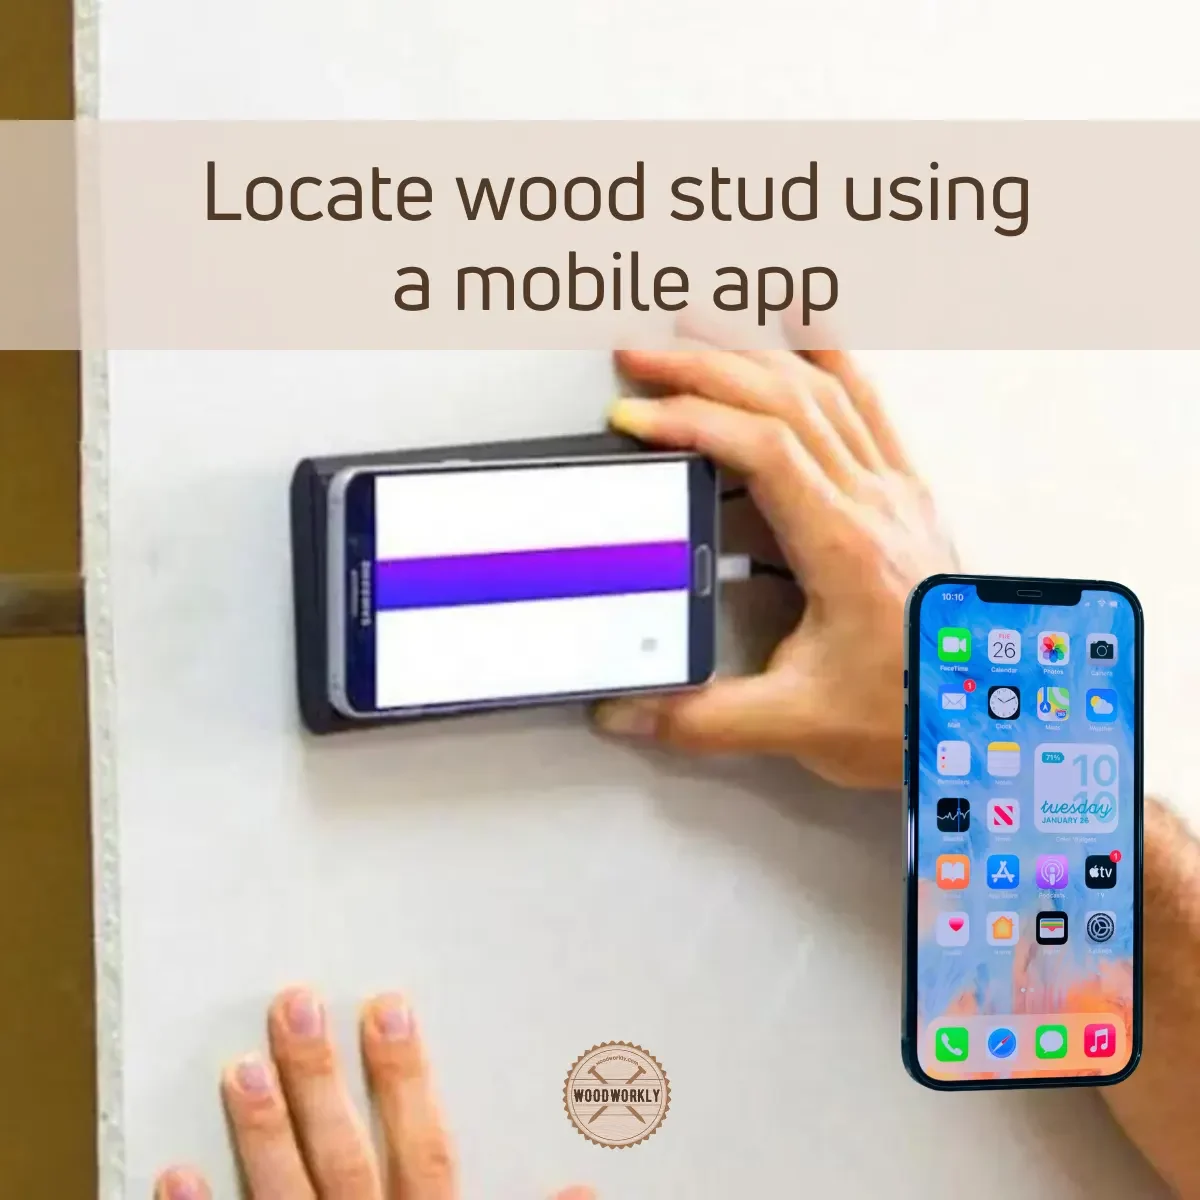 Locate wood stud using a mobile app